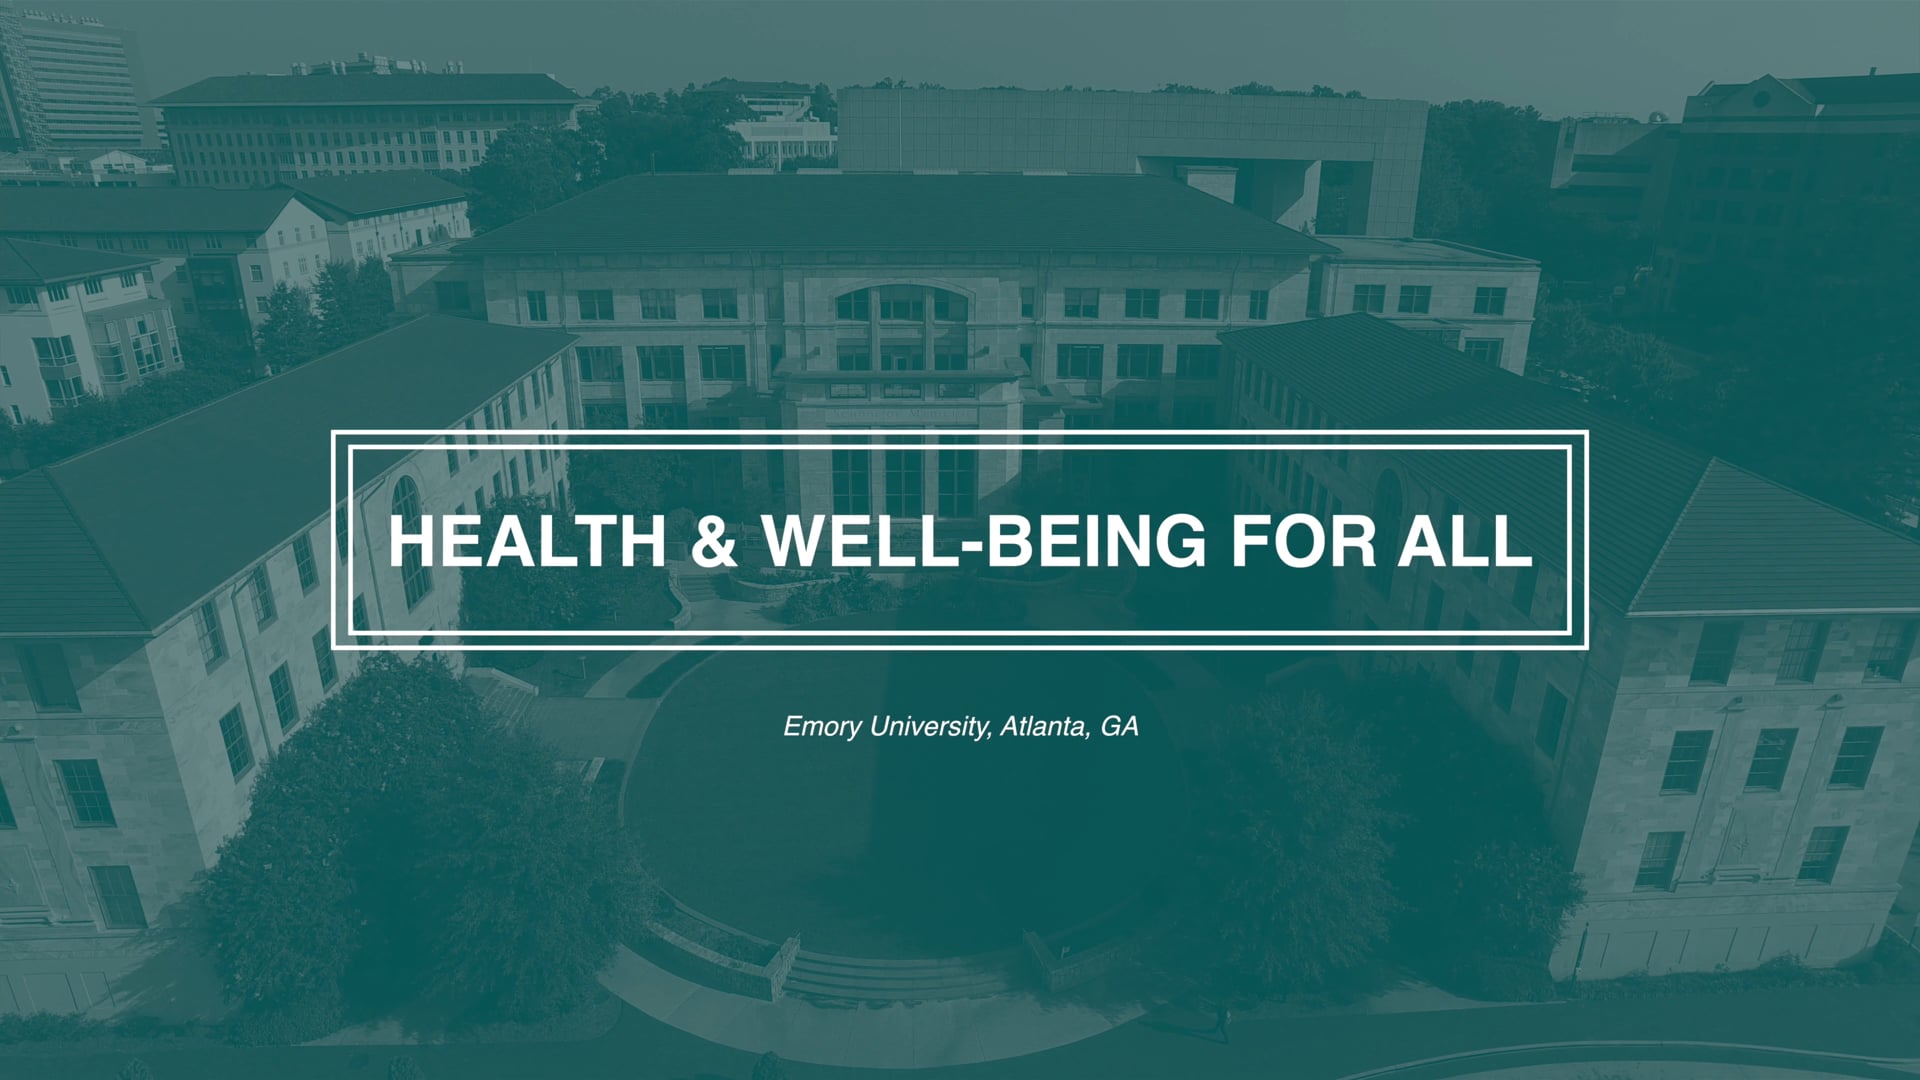 Health & Well-Being - Meeting in a Box